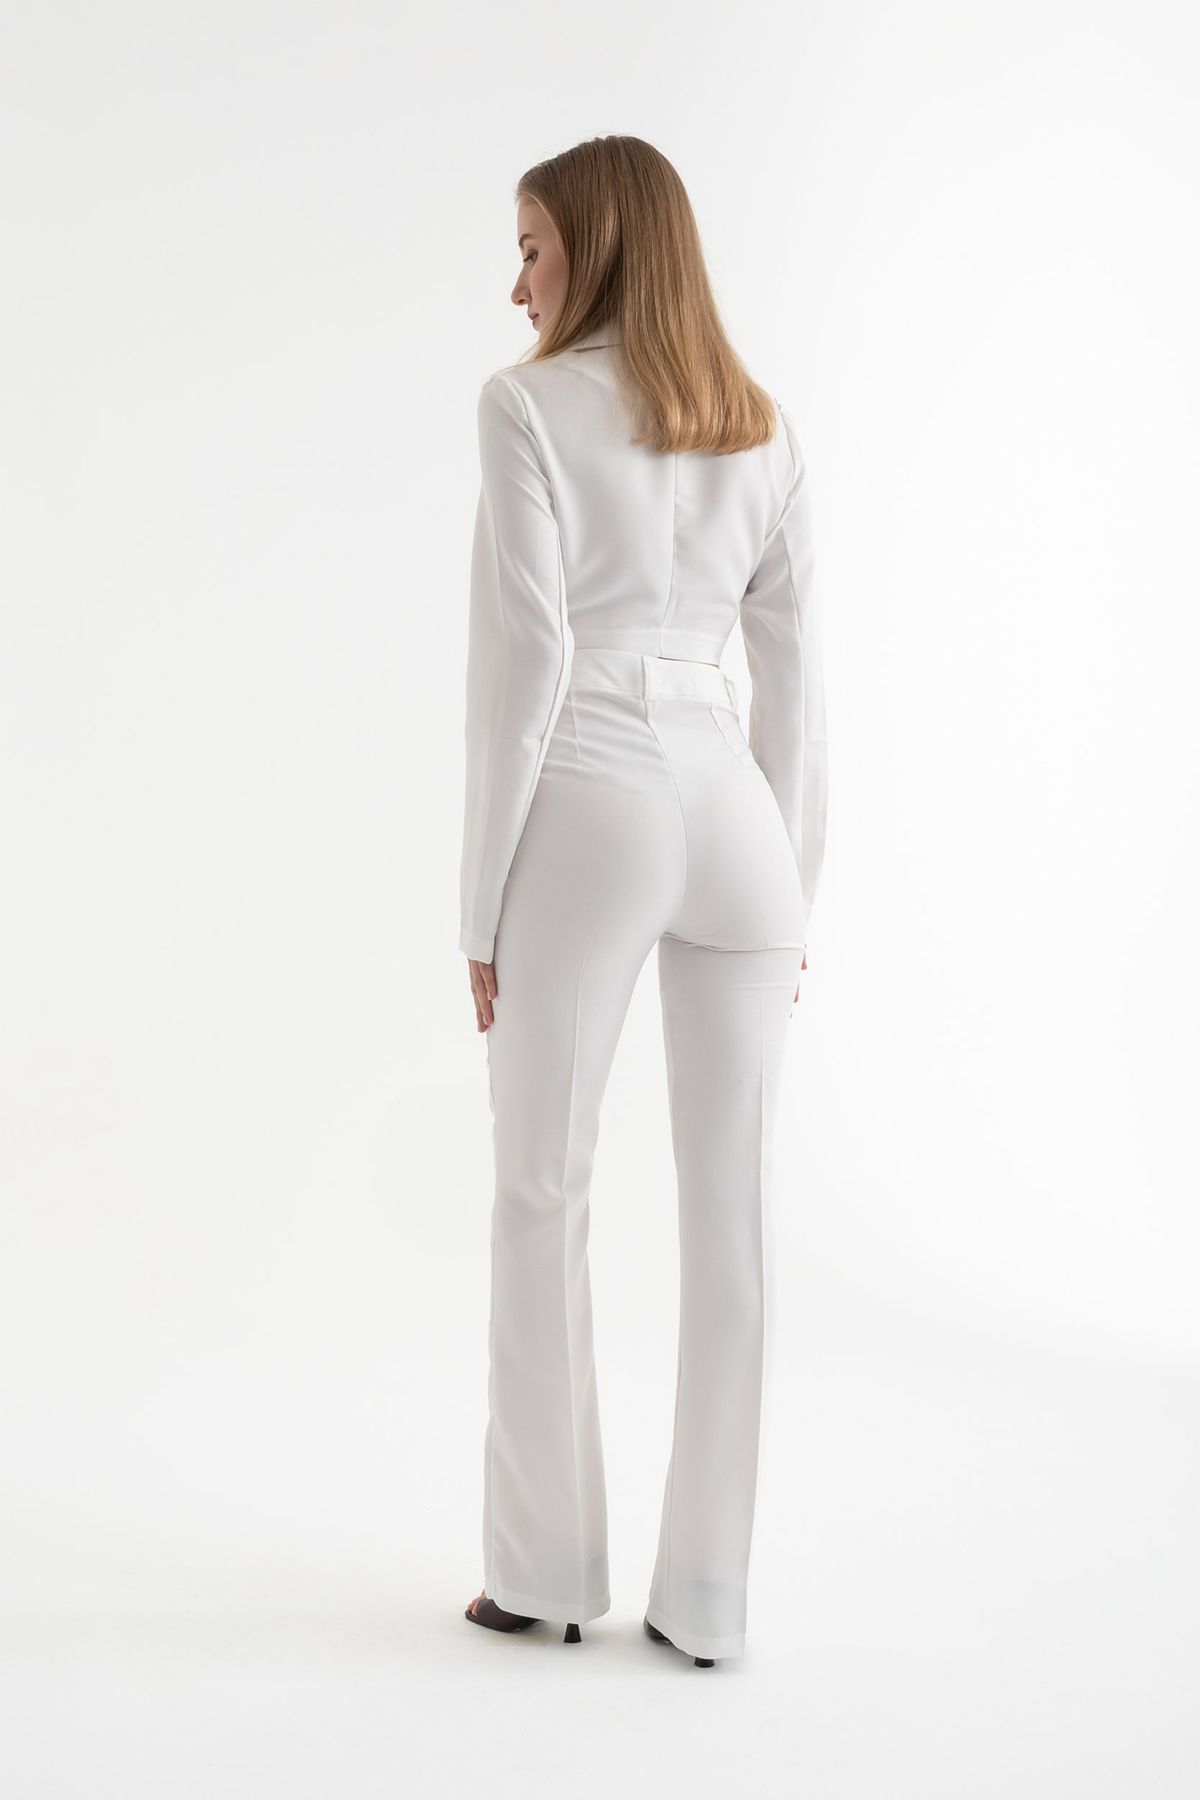 2 Pieces: Cropped Shirt with a Tie Up Detail & High Waist Straight Leg Trousers